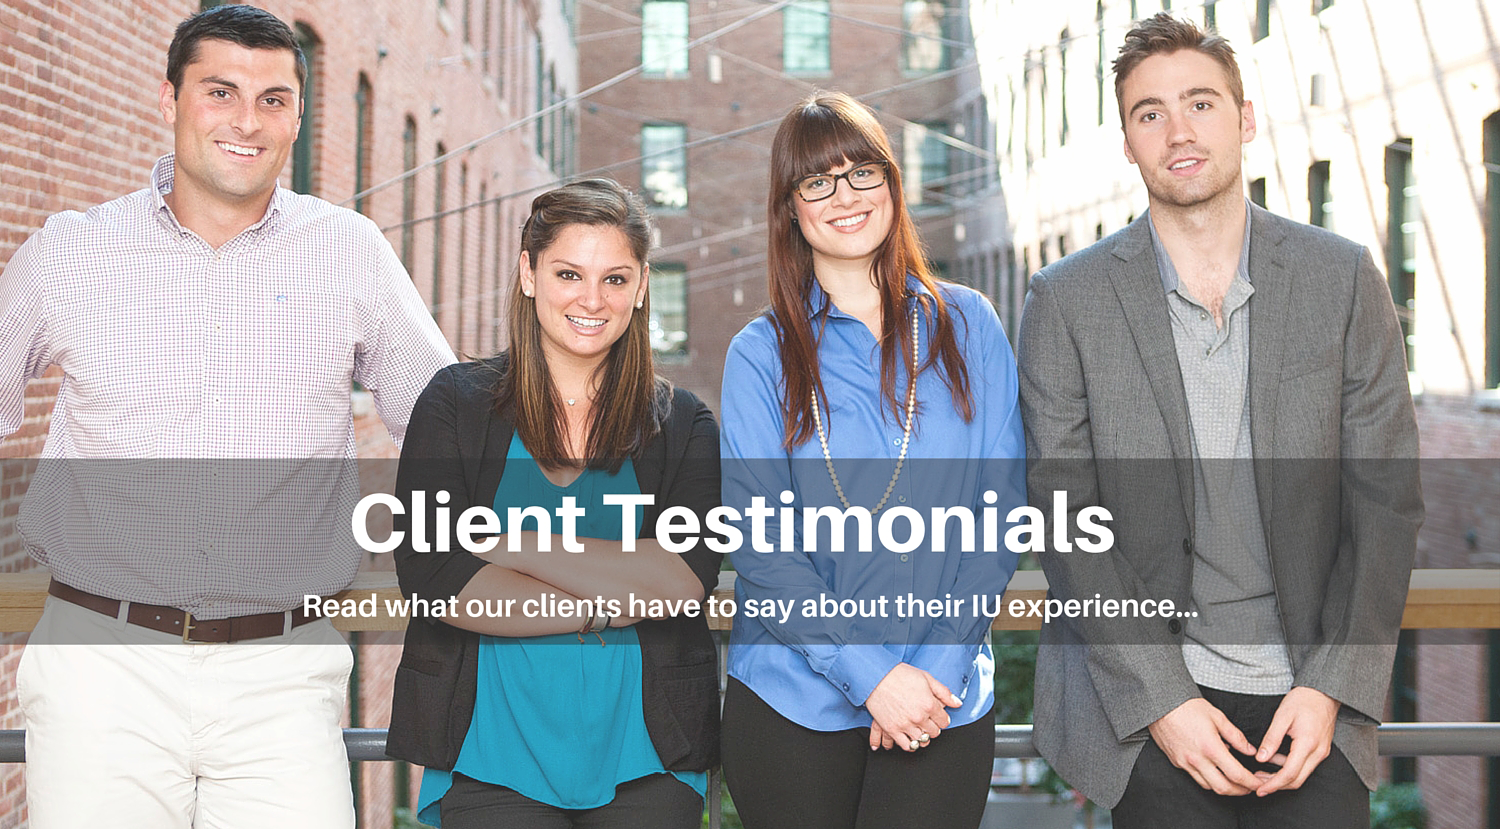 Client Testimonials from IU Group